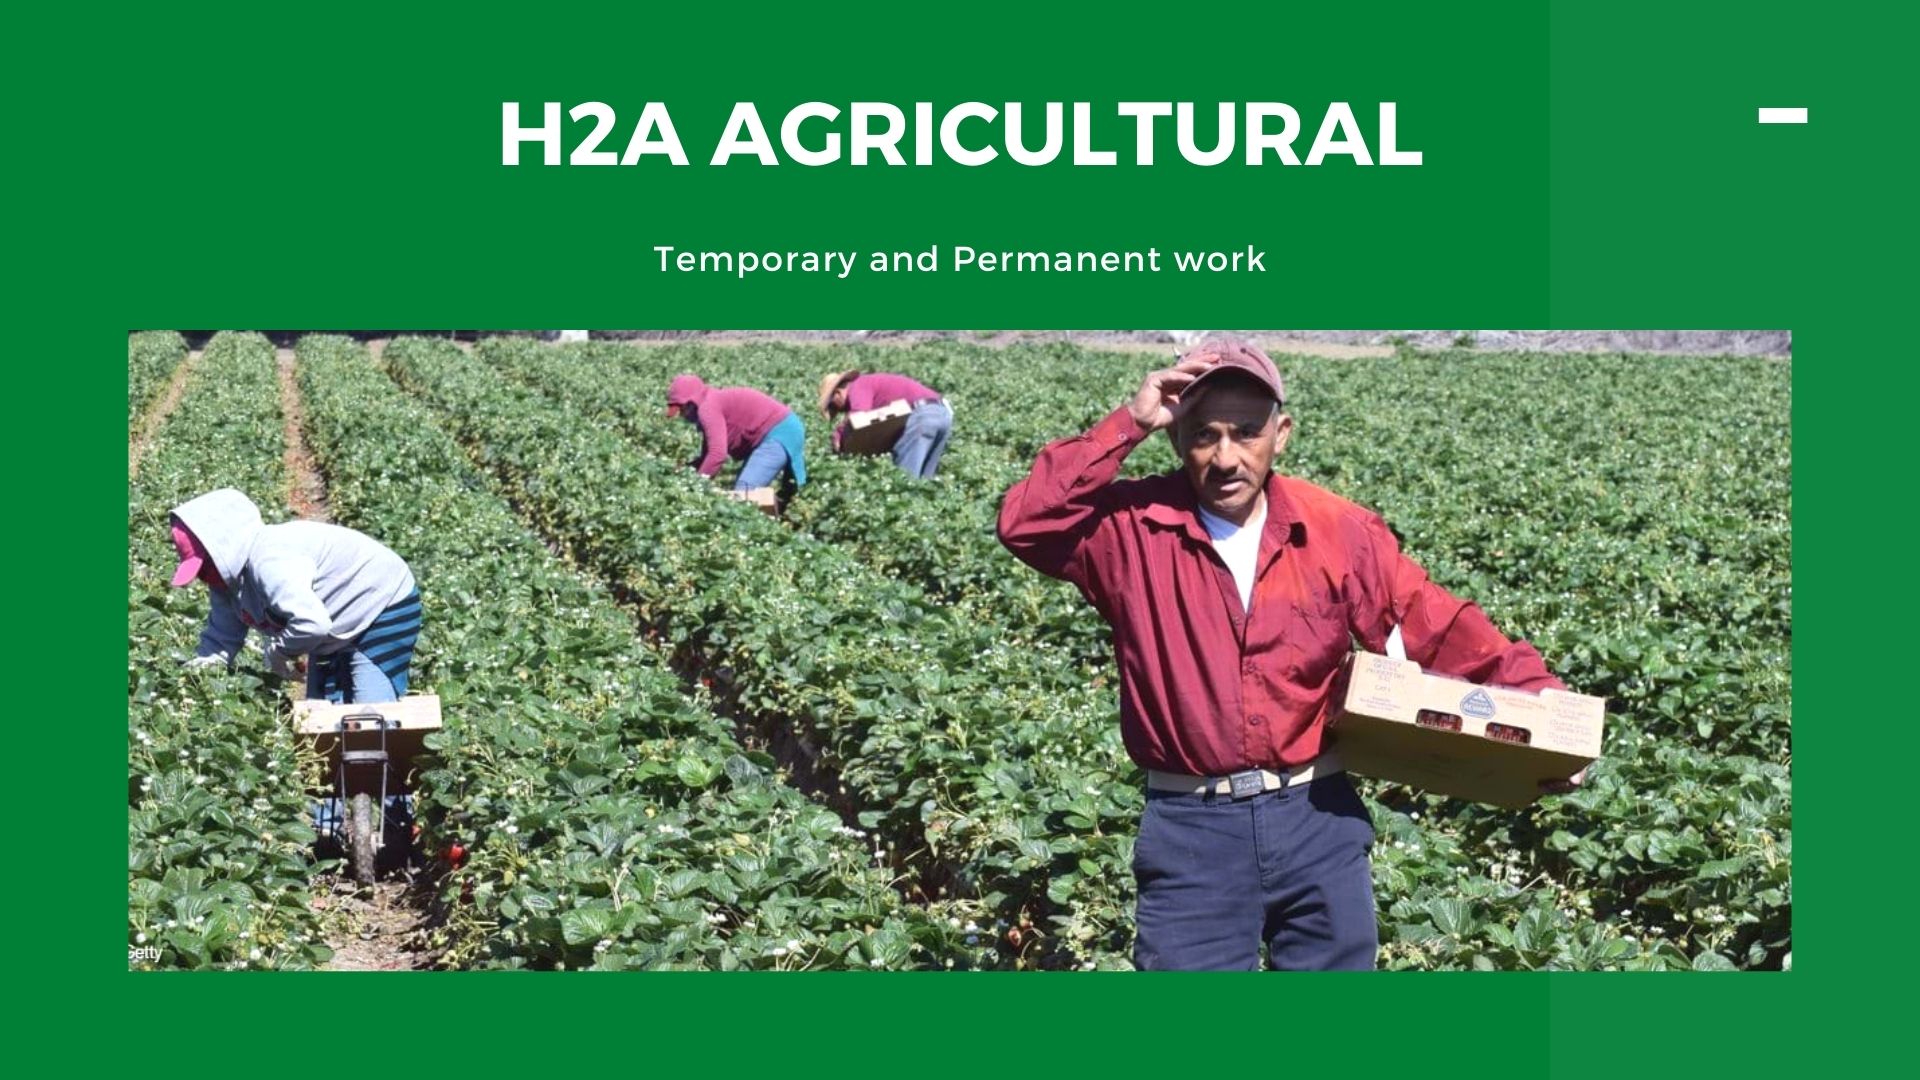 H2A AGRICULTURAL